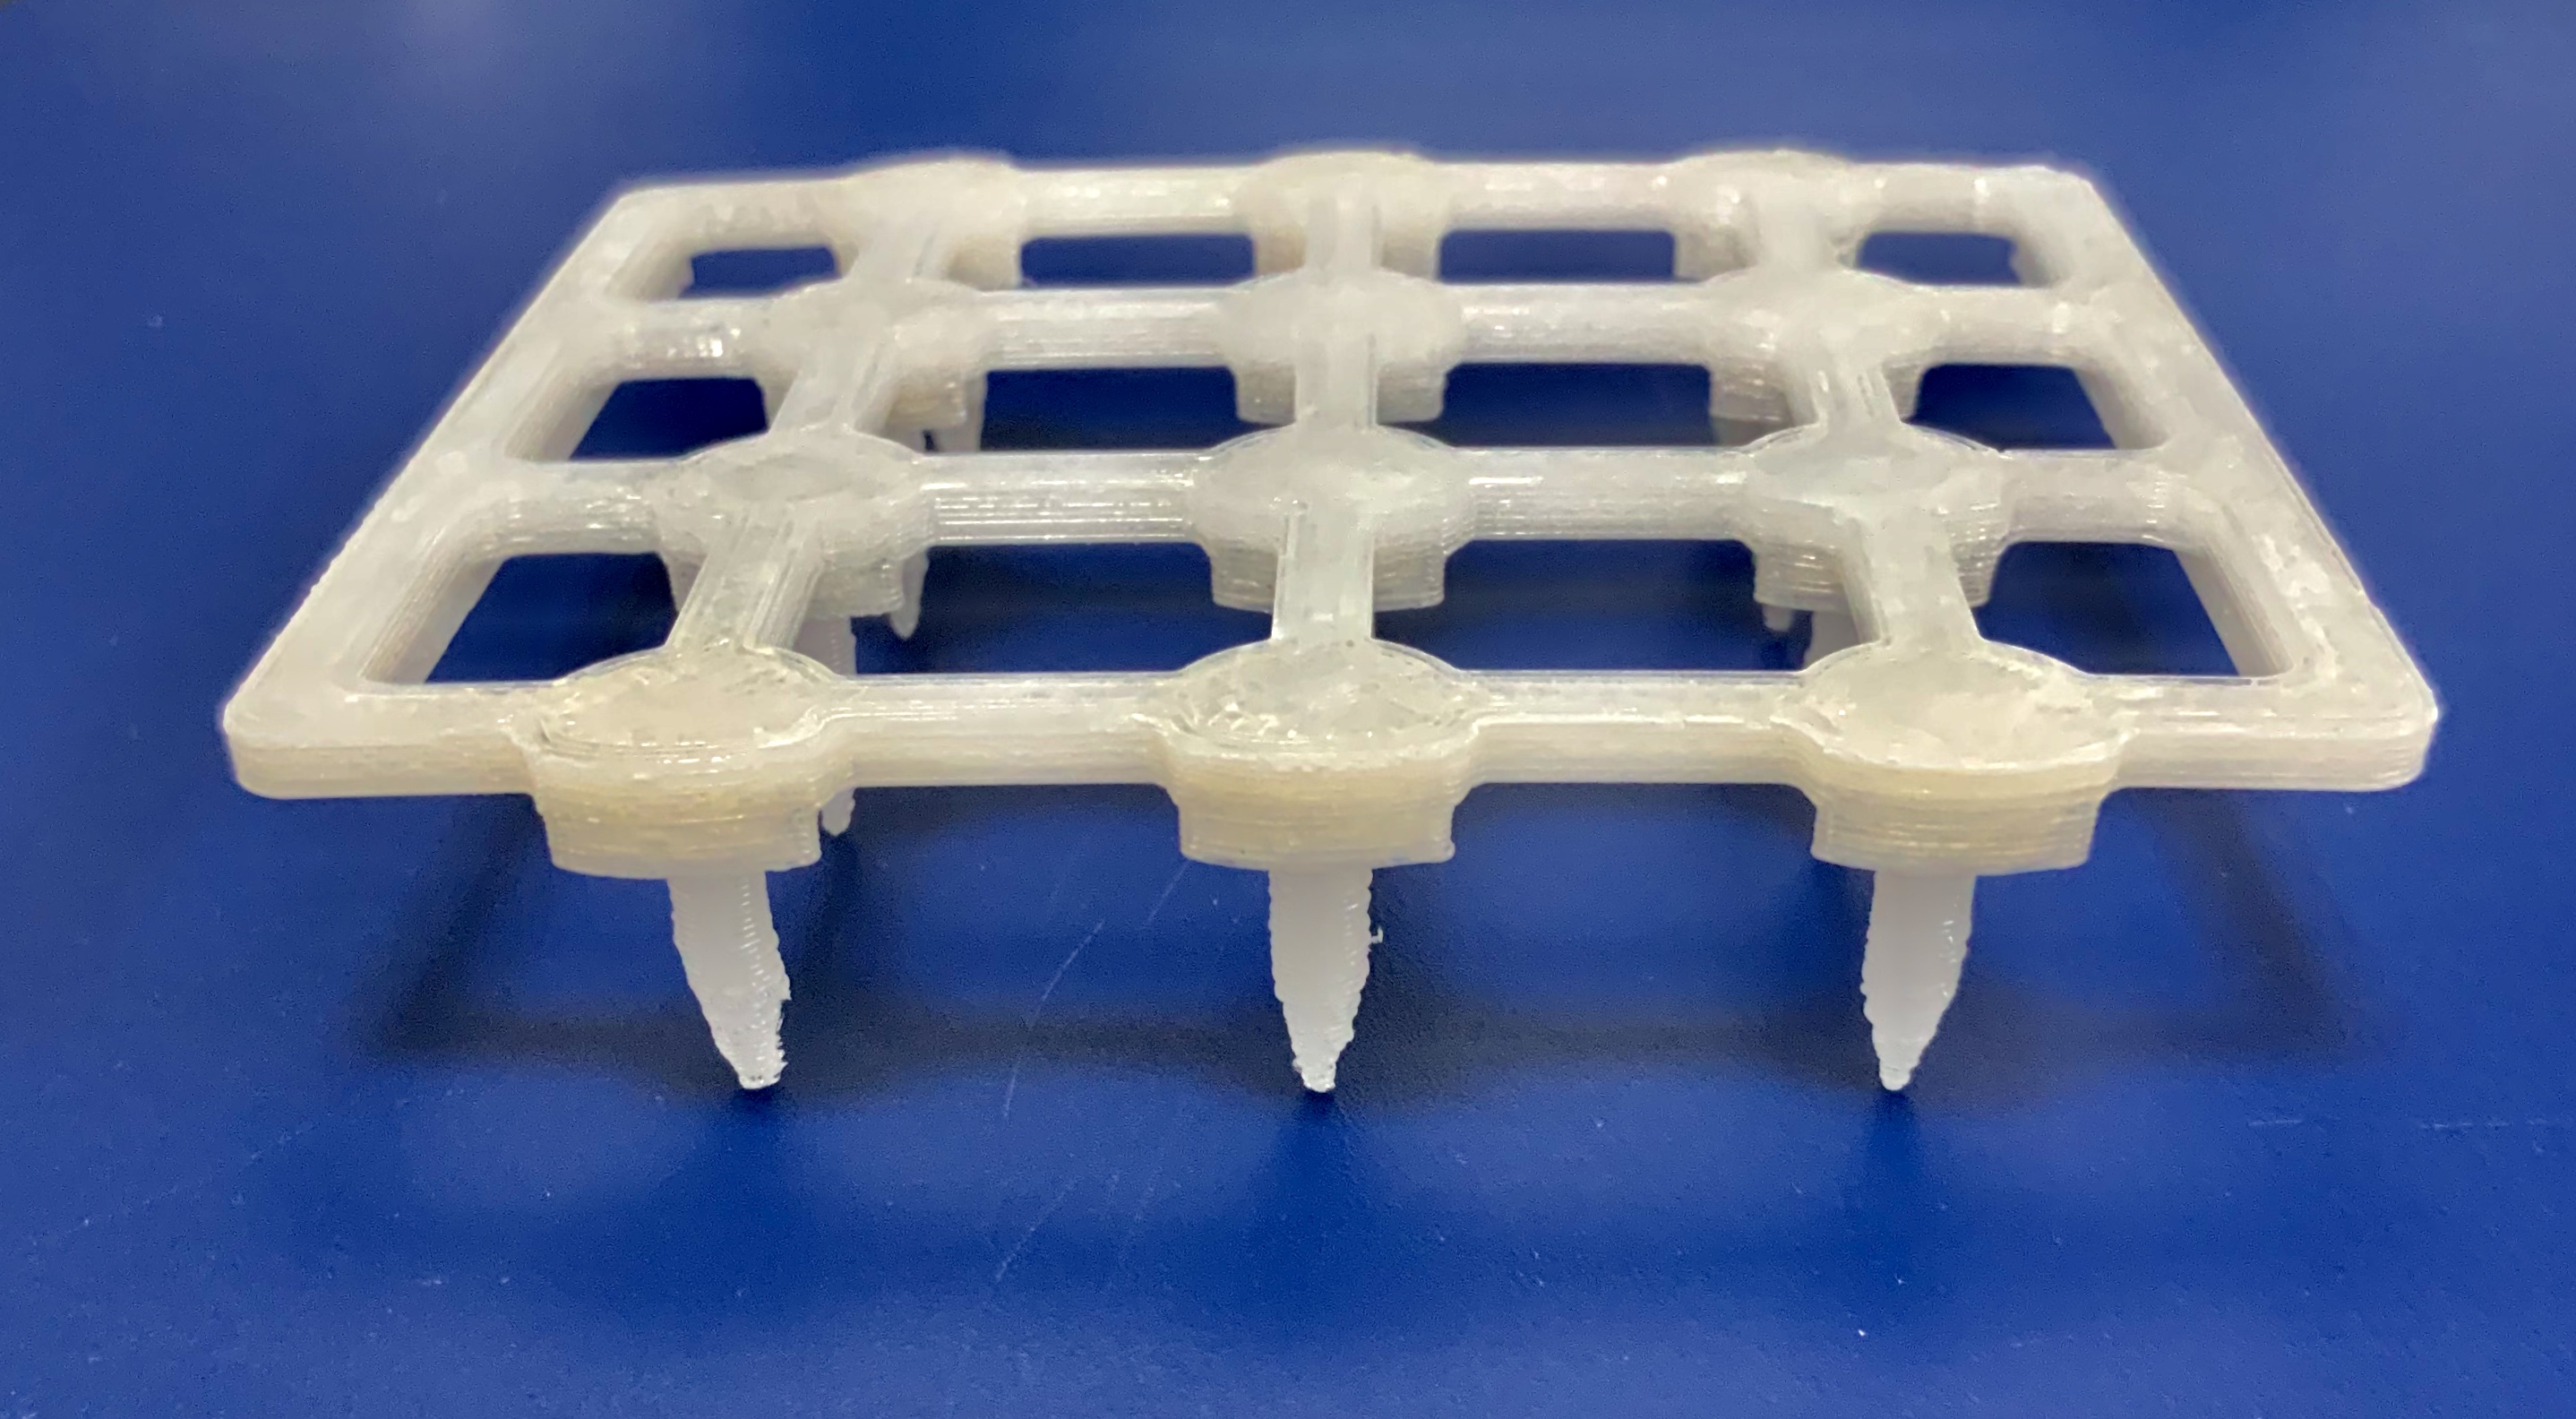 This is a photograph a 3D printed stamp for rapid inoculation of 12-well plates with microbial pathogens.